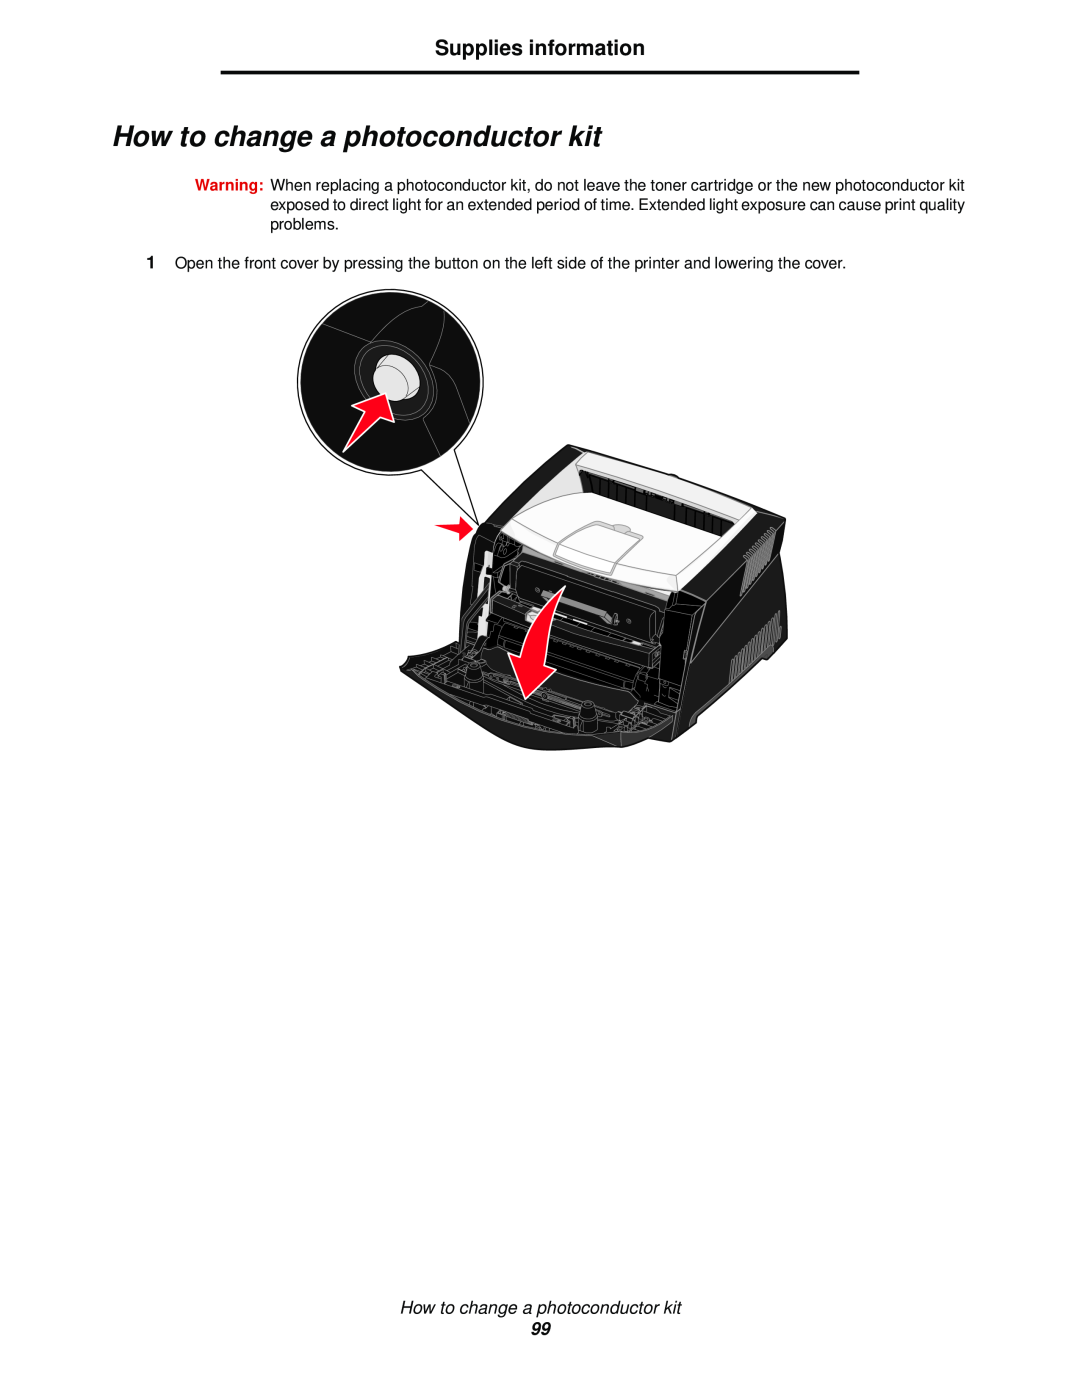 Lexmark 340, 342n manual How to change a photoconductor kit, Supplies information 